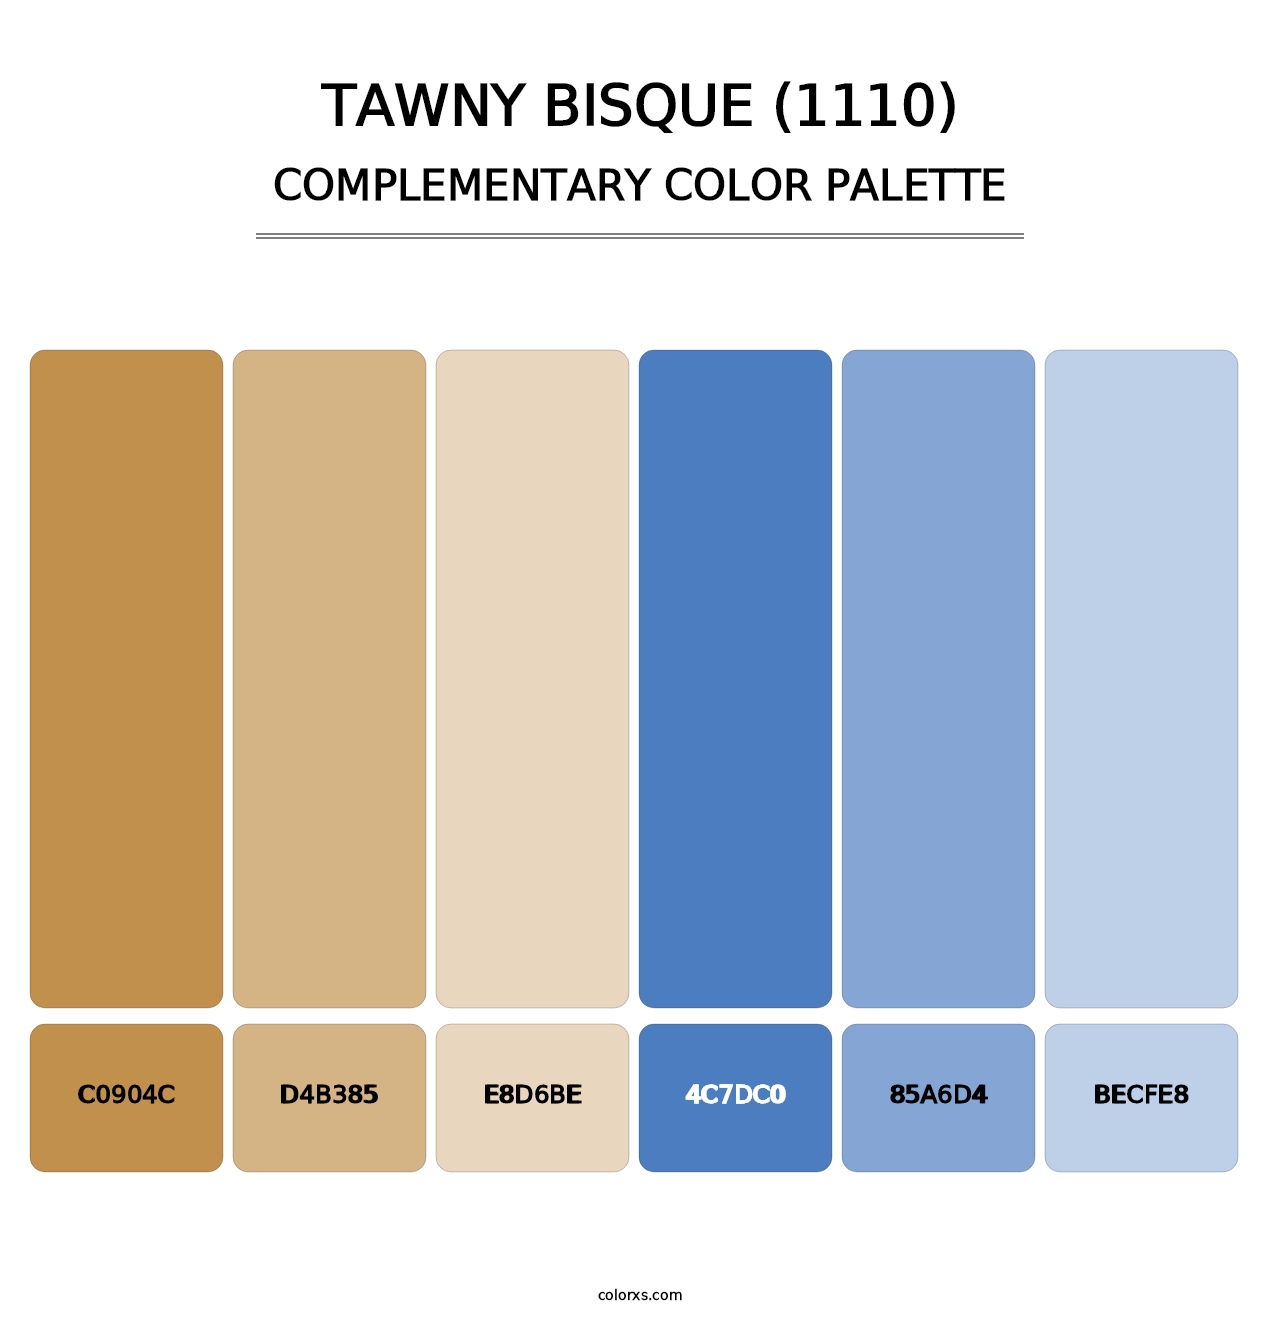 Tawny Bisque (1110) - Complementary Color Palette